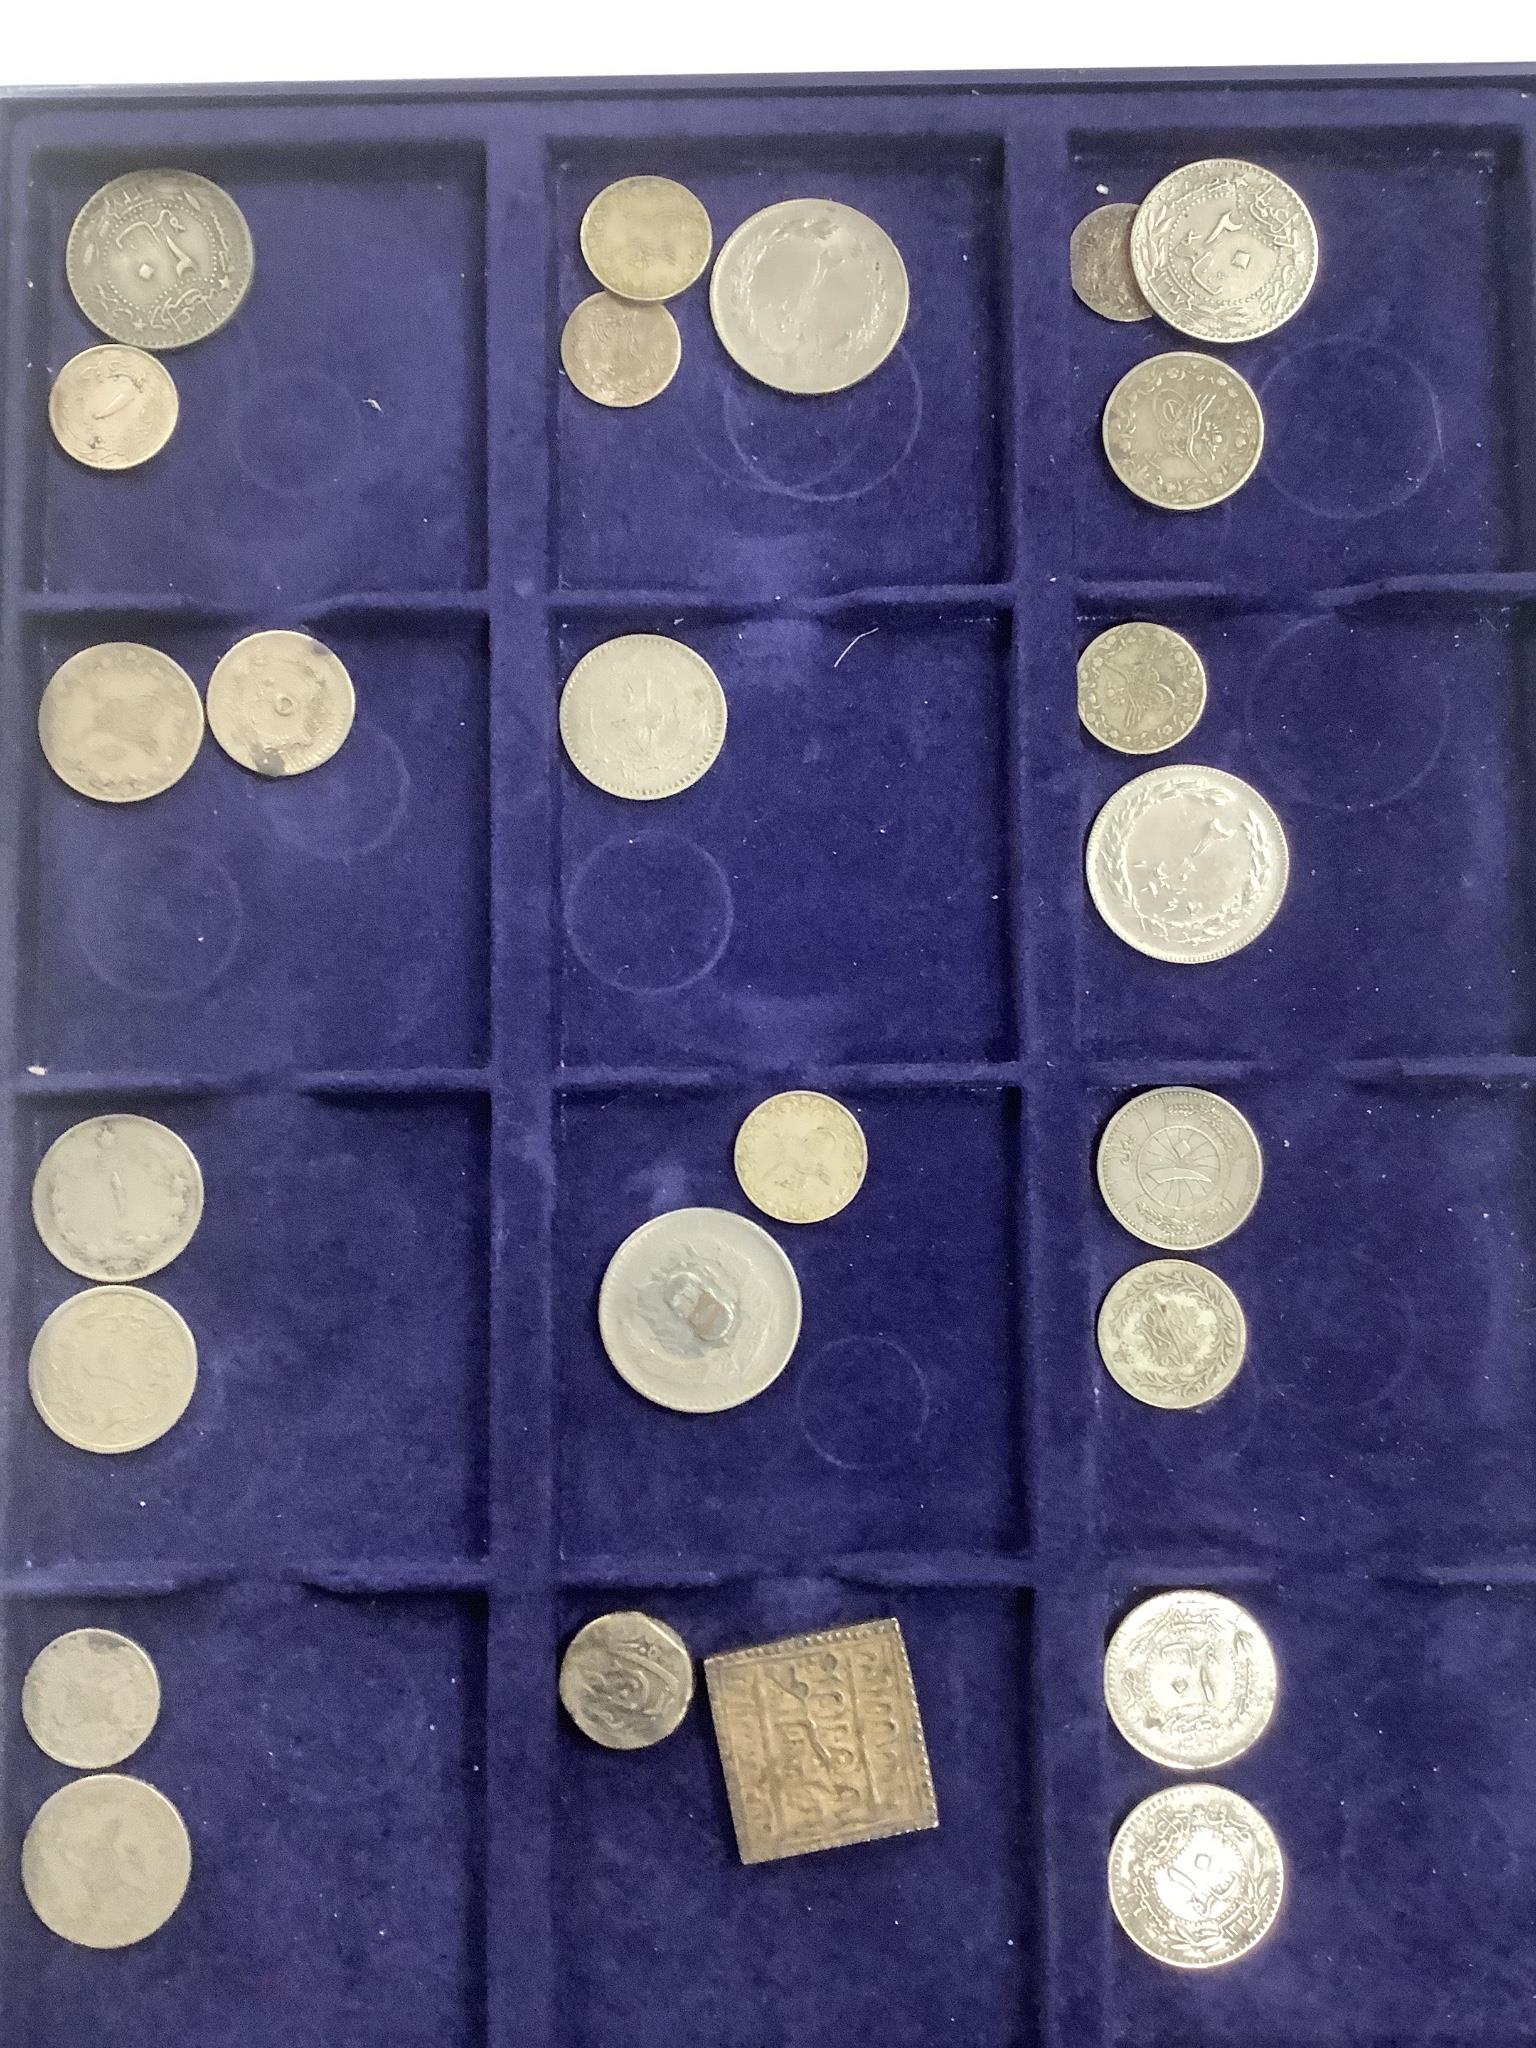 Ottoman Empire and Islamic coins, 19th/20th century, silver and bronze coinage, 12 trays